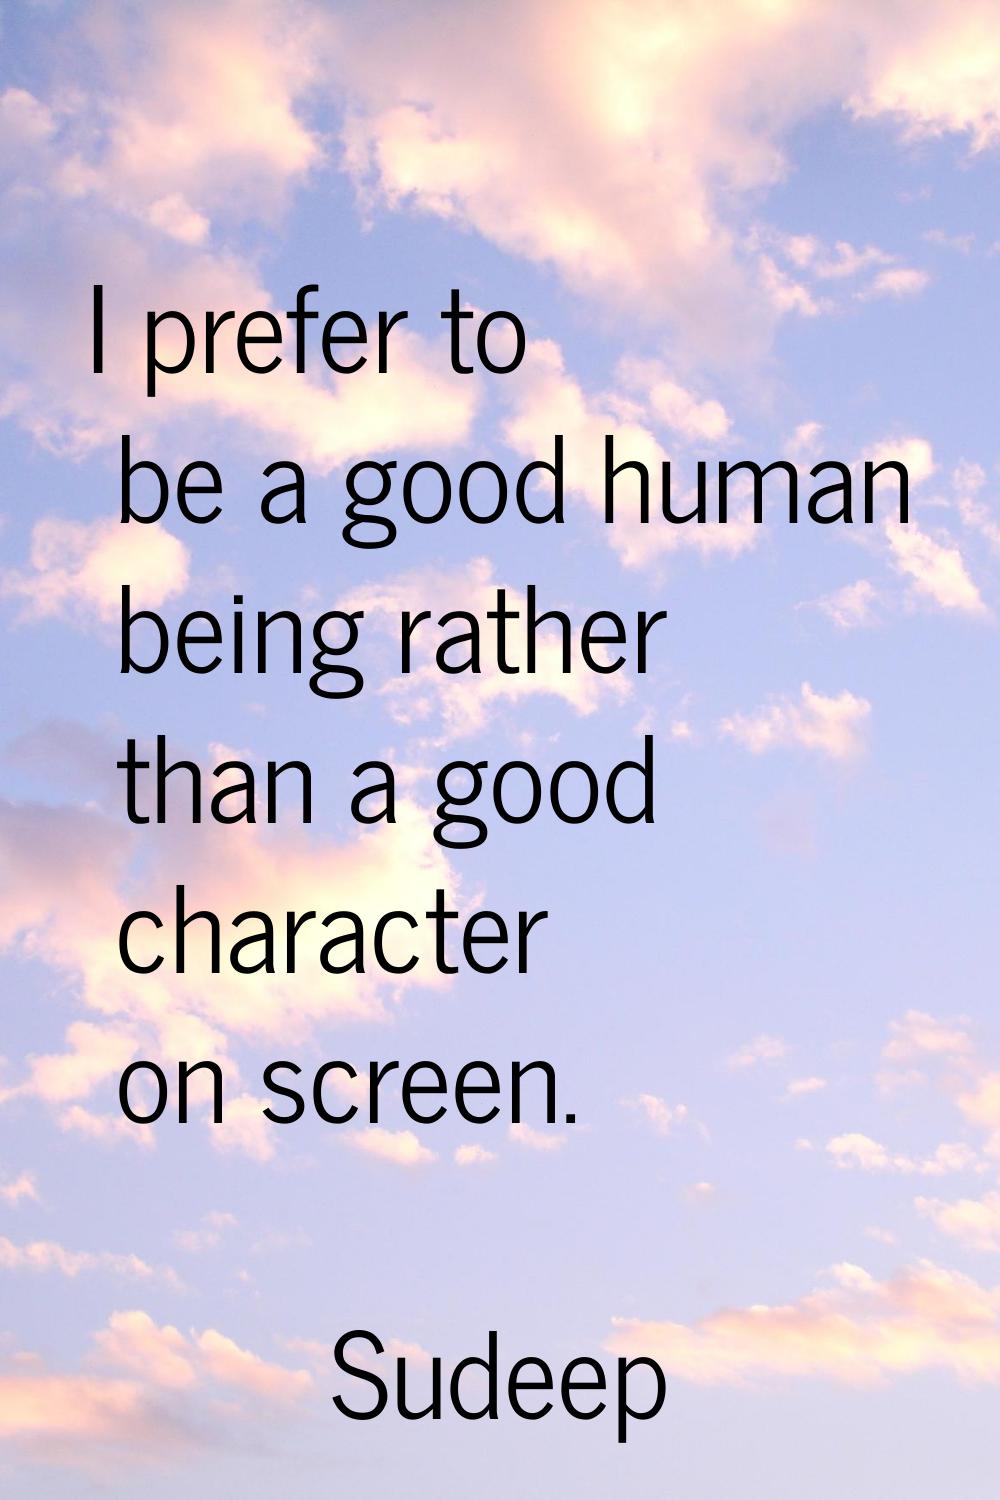 I prefer to be a good human being rather than a good character on screen.